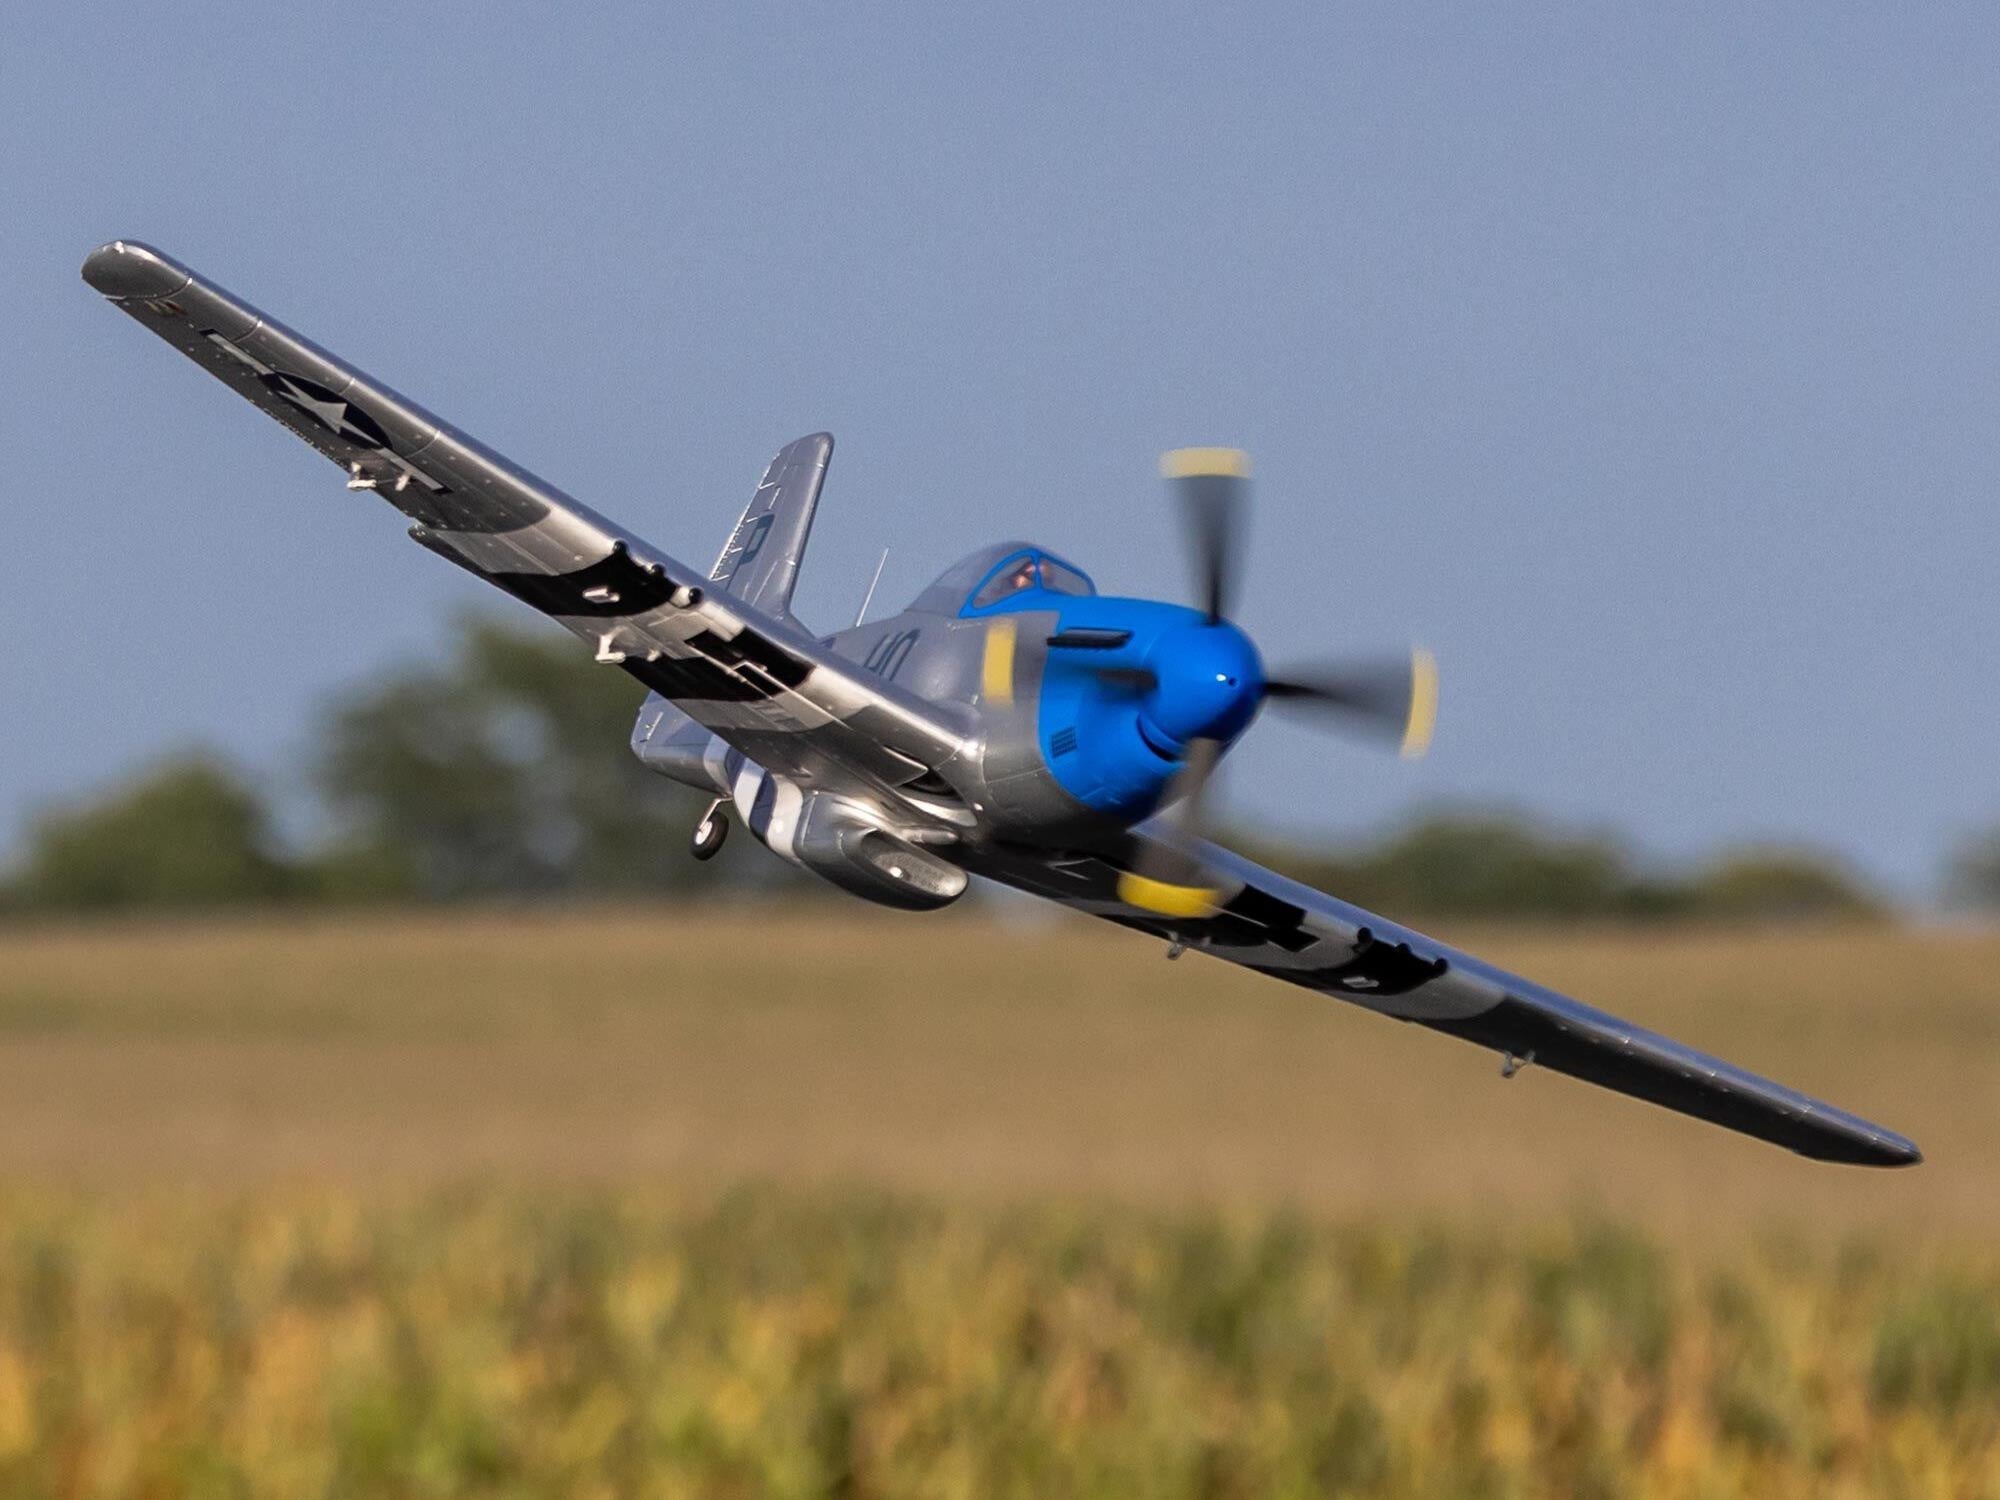 E-Flite P-51D Mustang 1.2m BNF Basic with AS3X and SAFE Select “Cripes A’Mighty 3rd” EFL089500